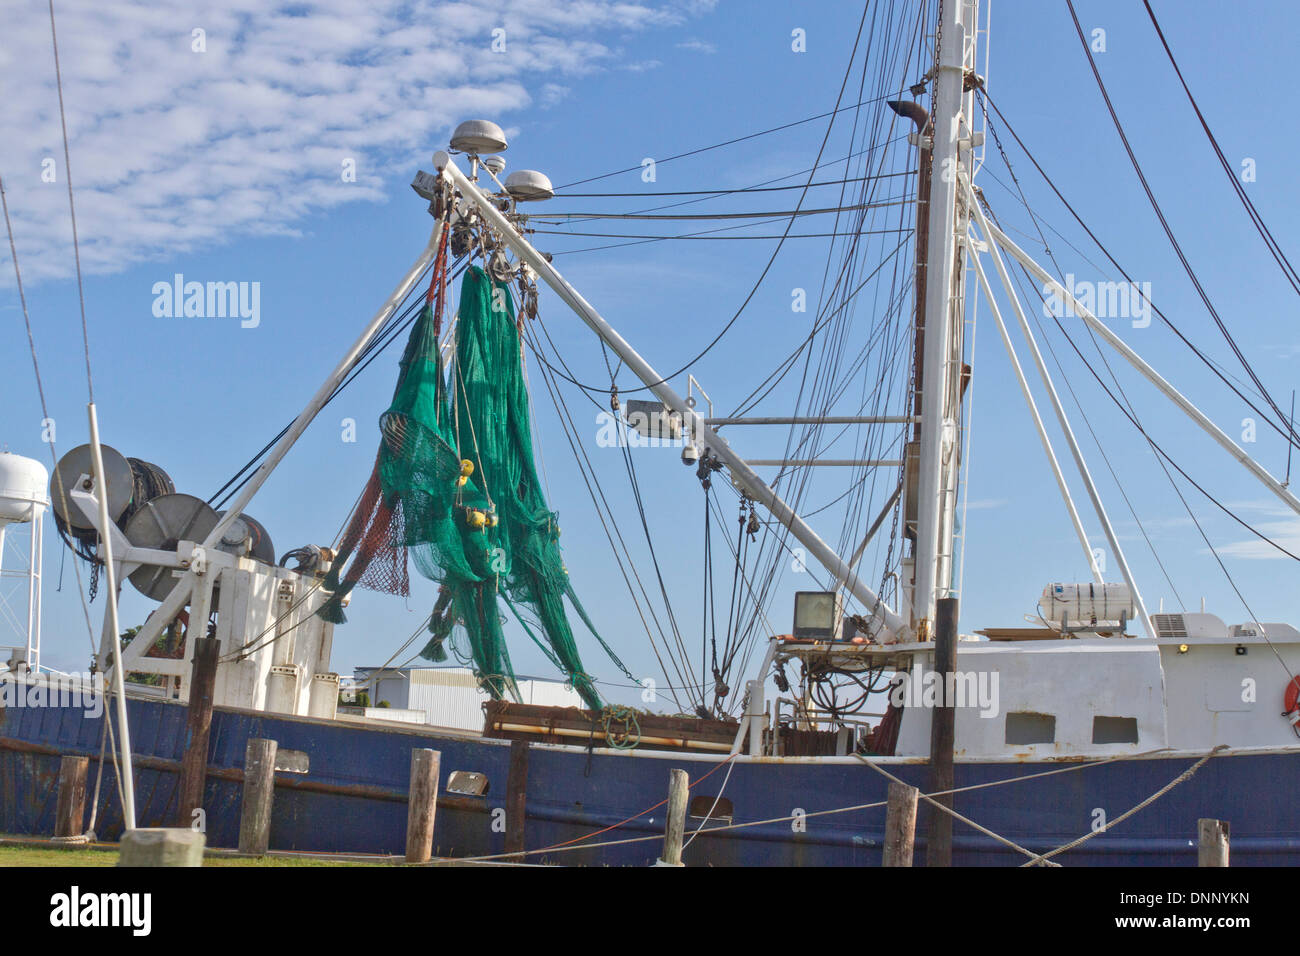 A commercial fishing trawler with green nets Stock Photo